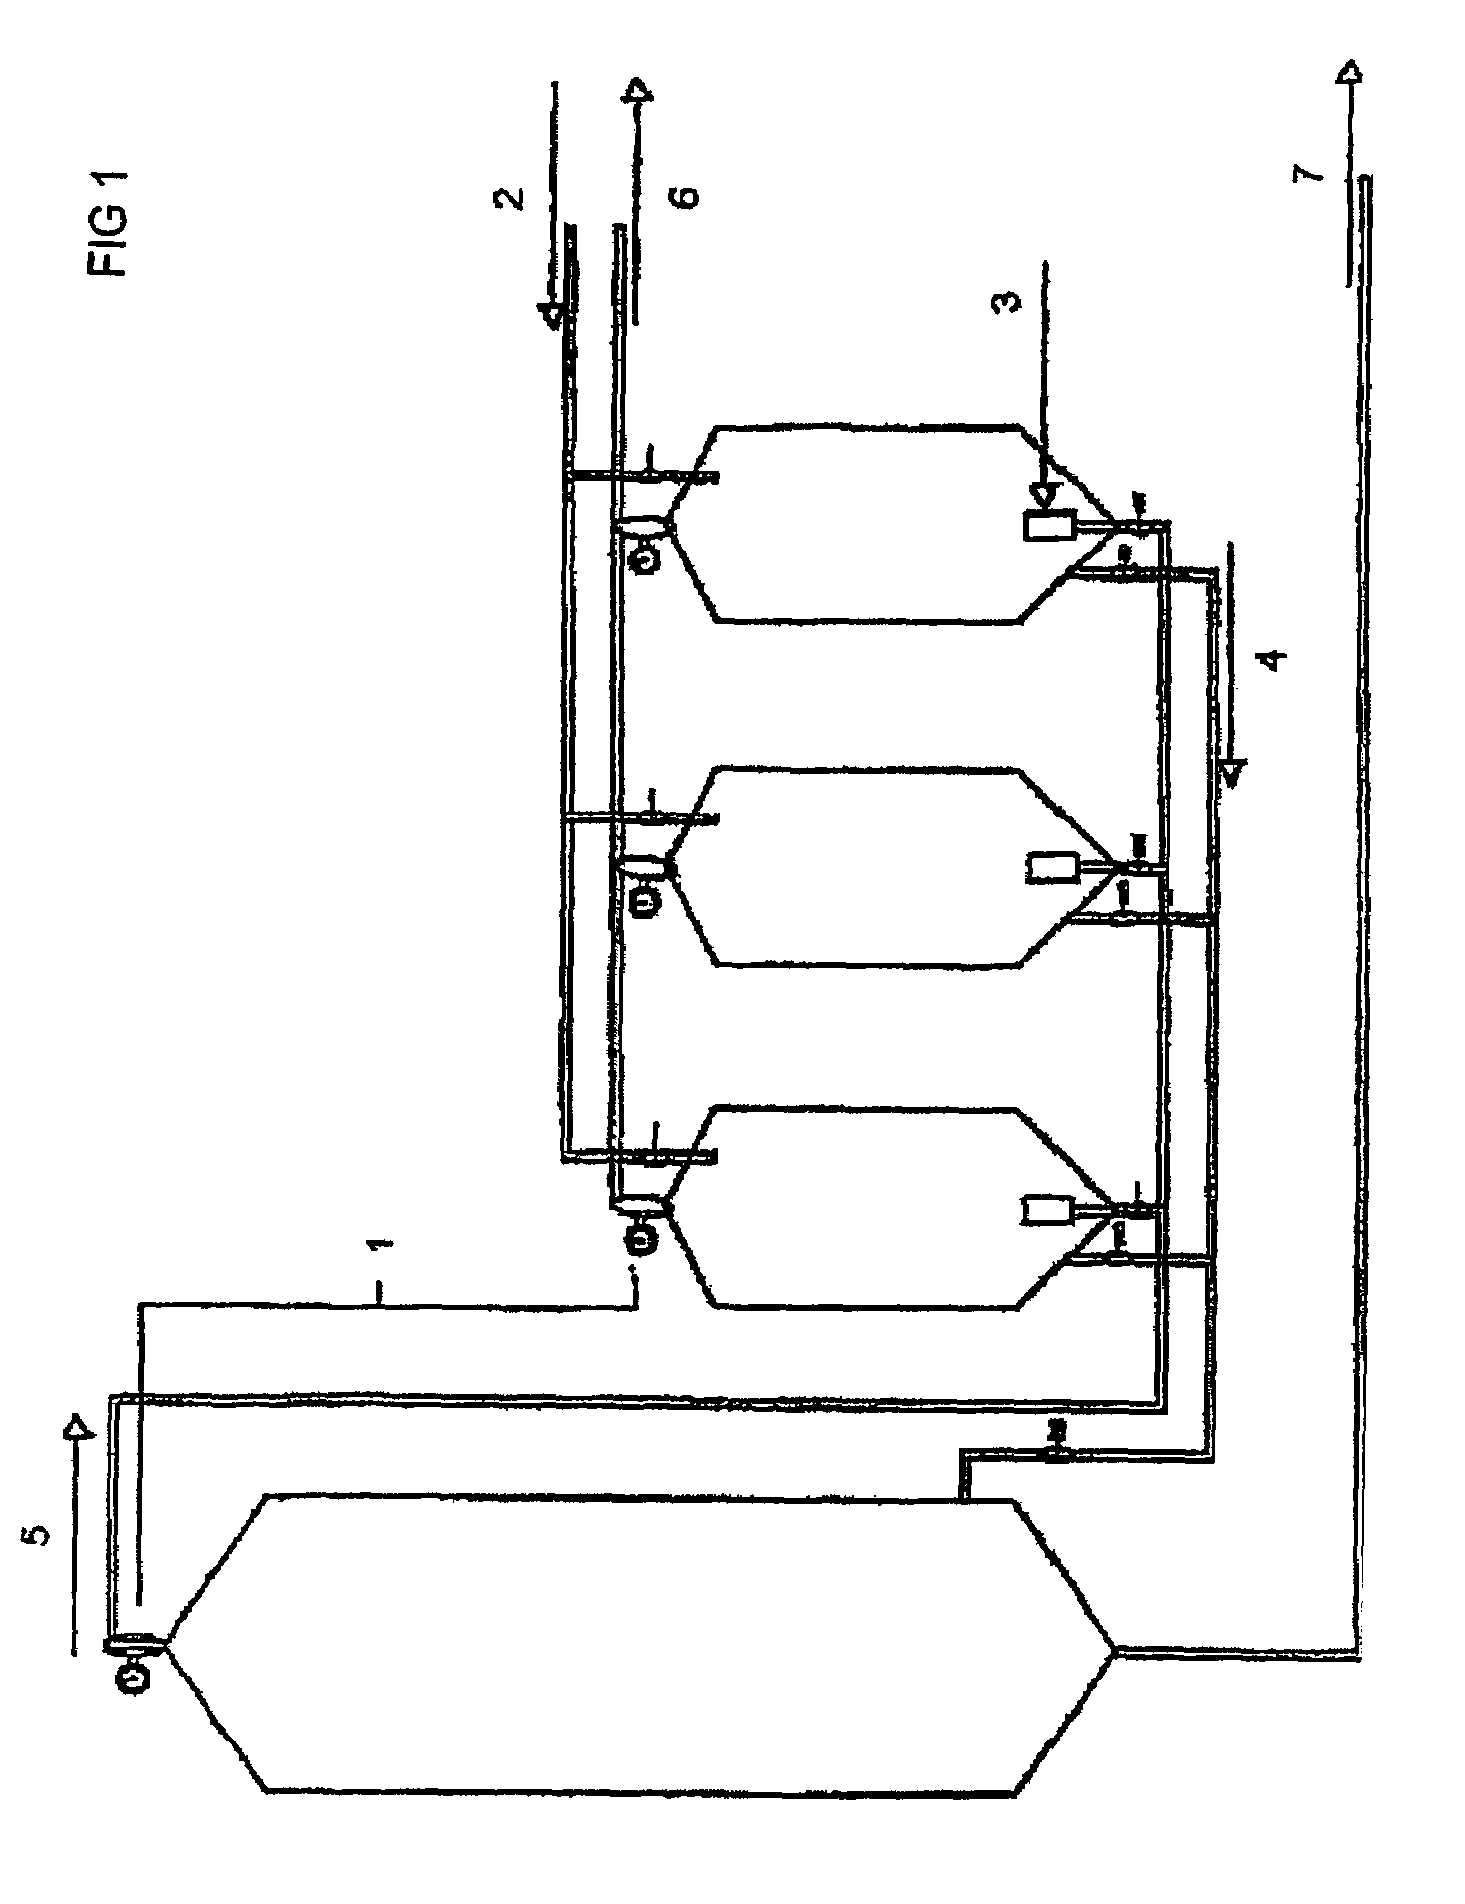 Method and equipment for processing organic material